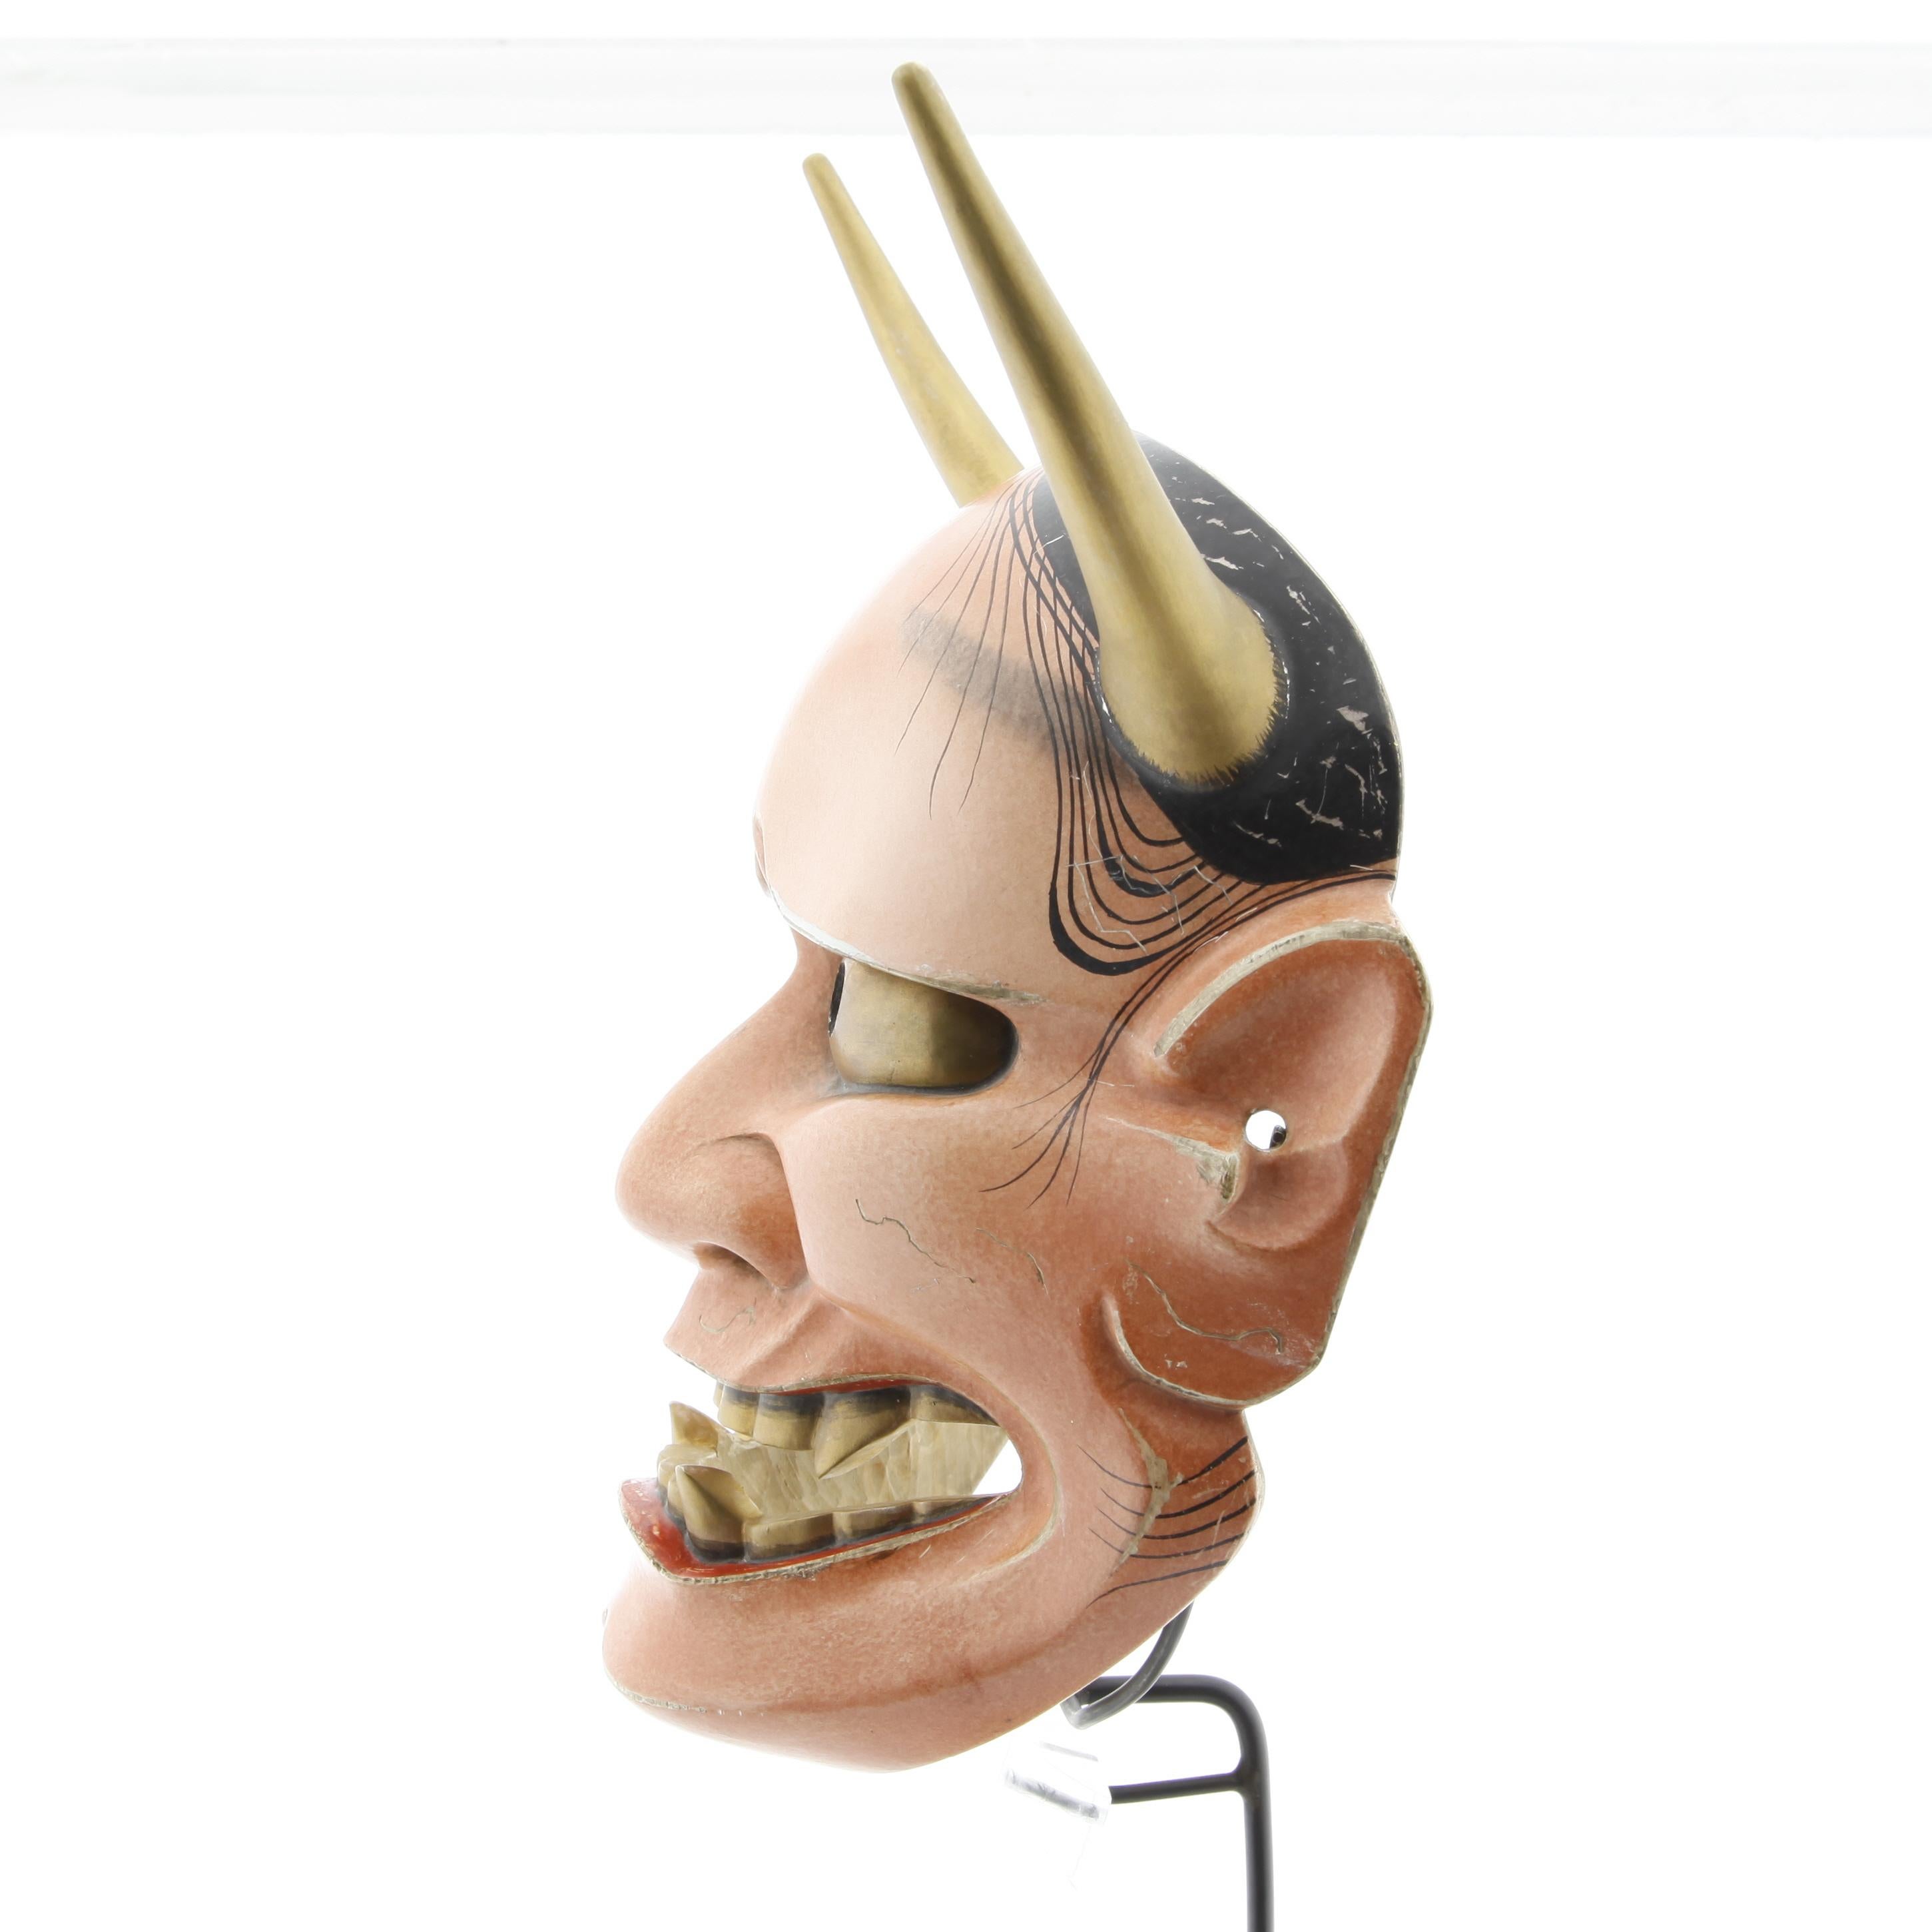 Han'nya (Noh Mask of a Demon) by Tanaka 

Date: 20th century
Size: 21.5 x 17.5 cm; Horns length: 10.5 cm

Hannya is perhaps one of the most recognizable character from Japanese theatre, due in part to the spectacular mask that depicts her, with